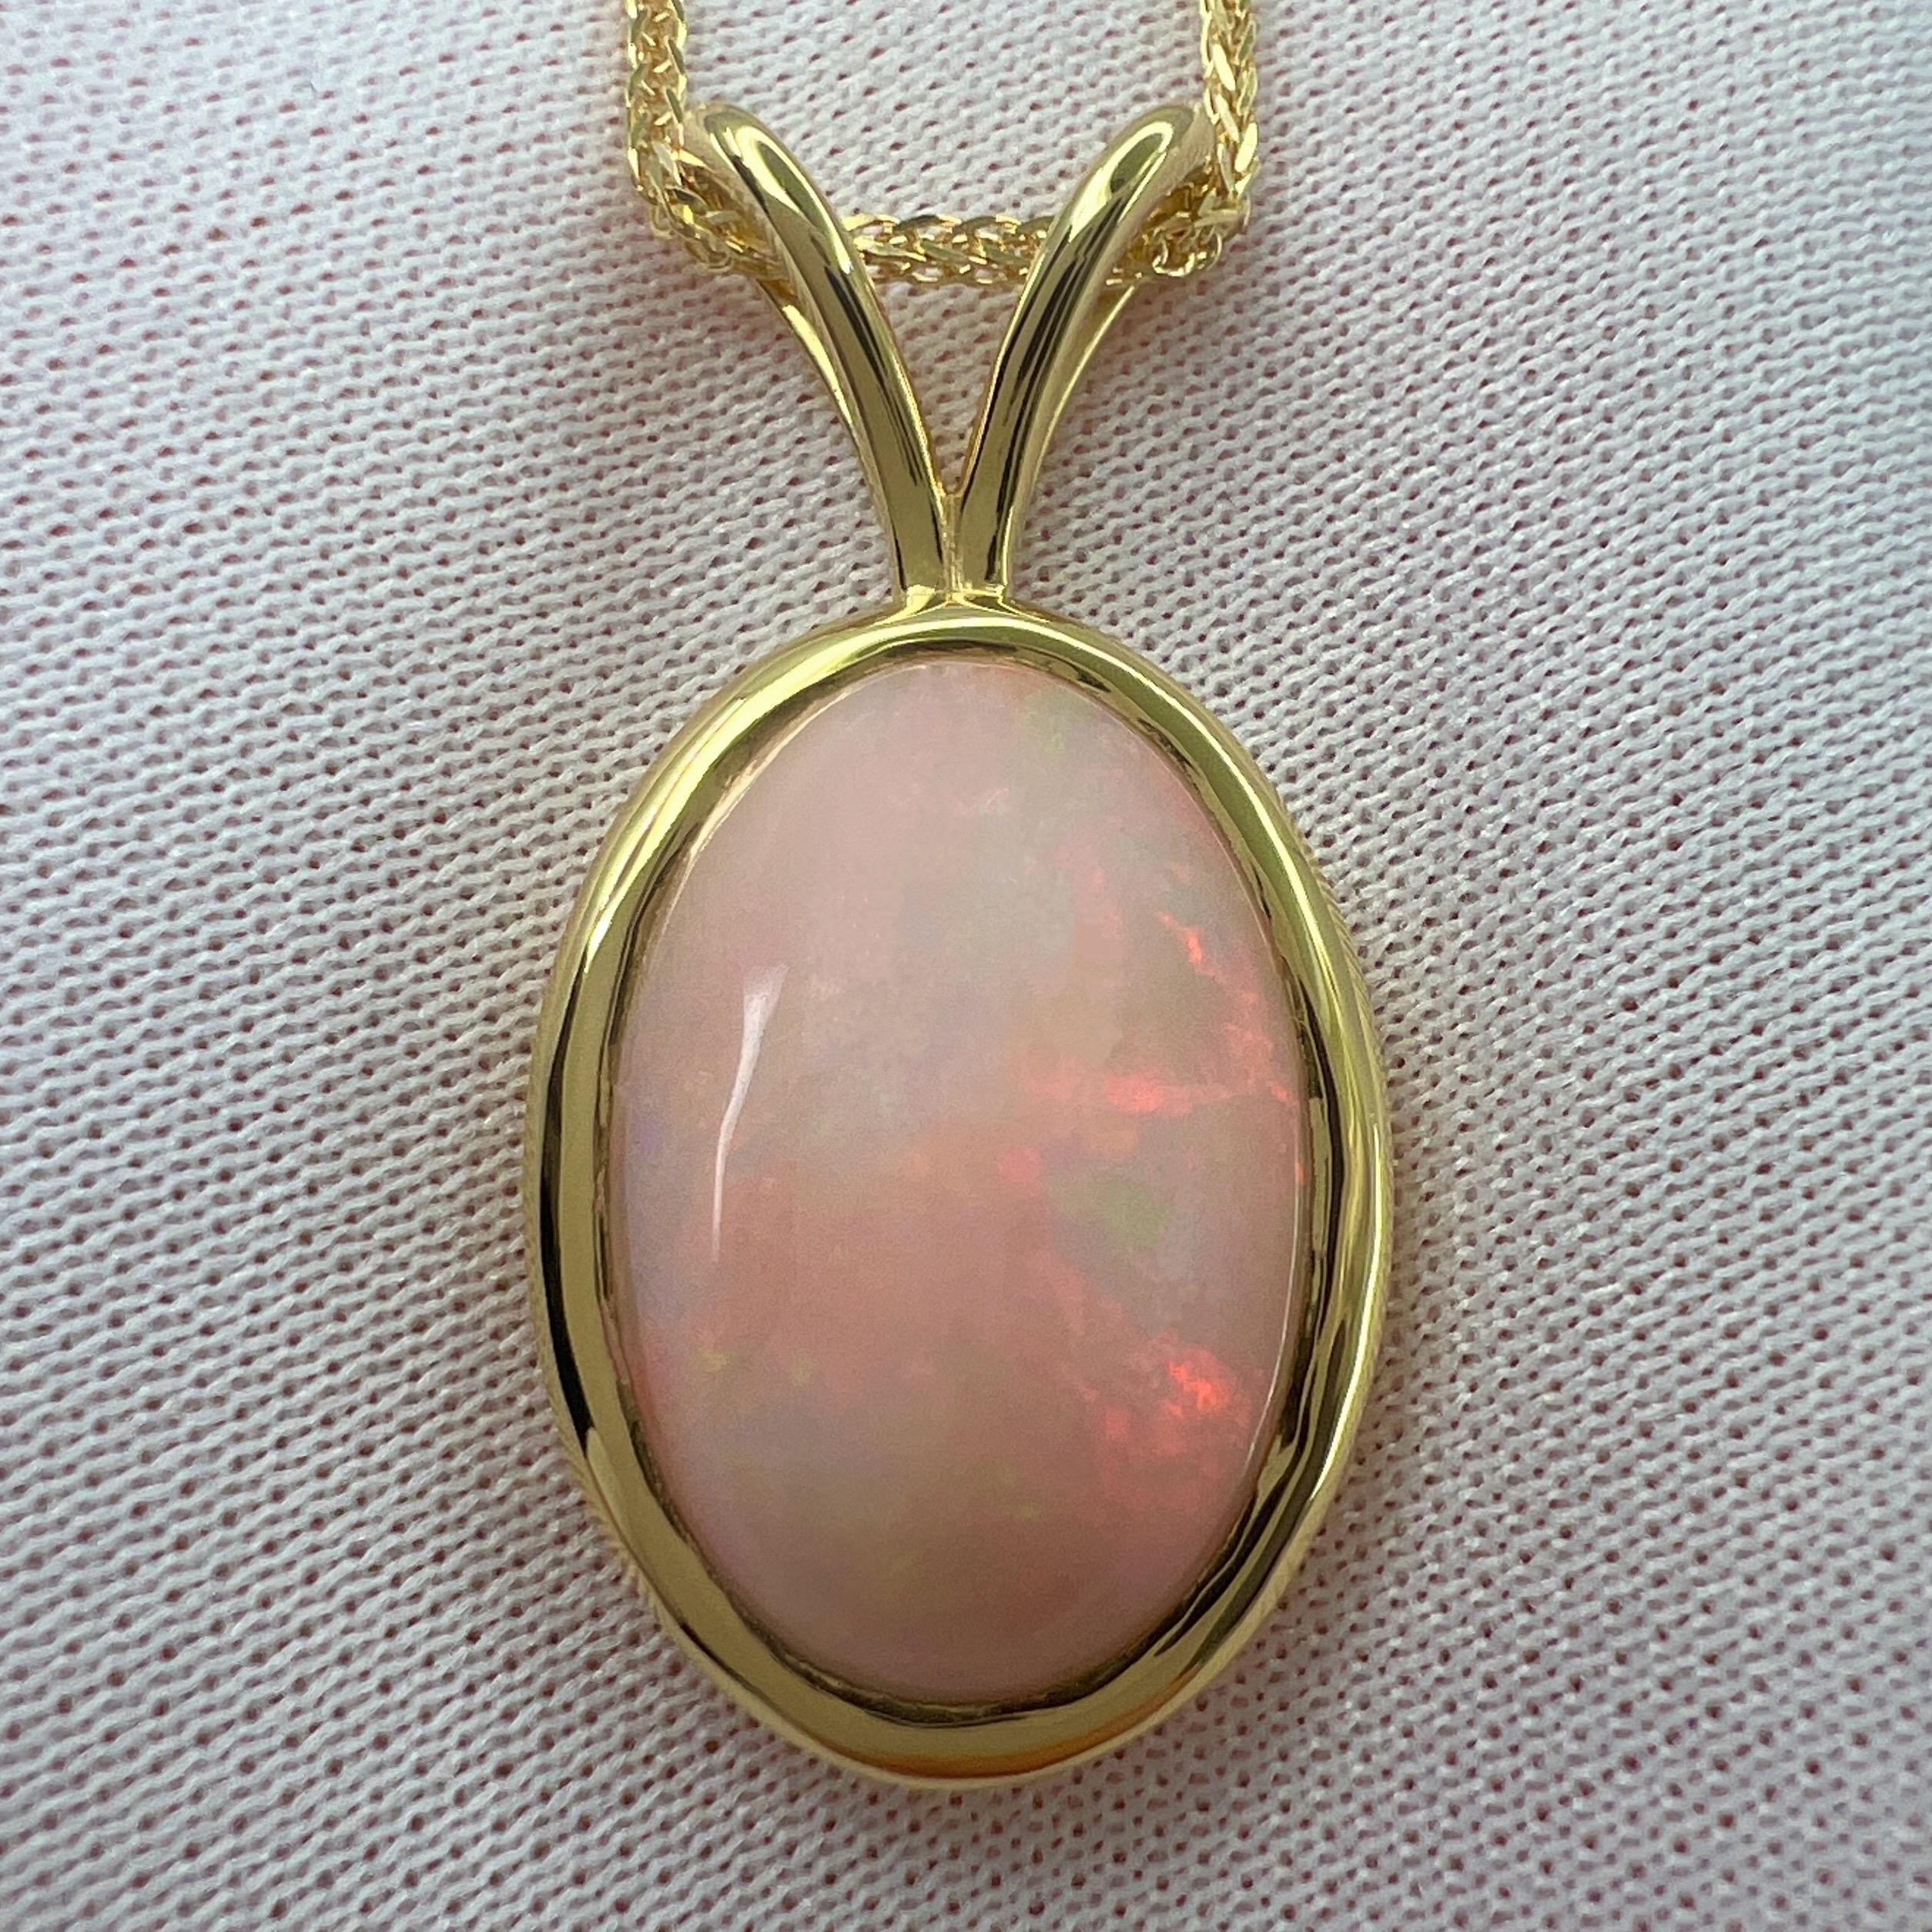 6.15ct Fine White Opal Oval Cabochon 18k Yellow Gold Bezel Pendant Necklace For Sale 7